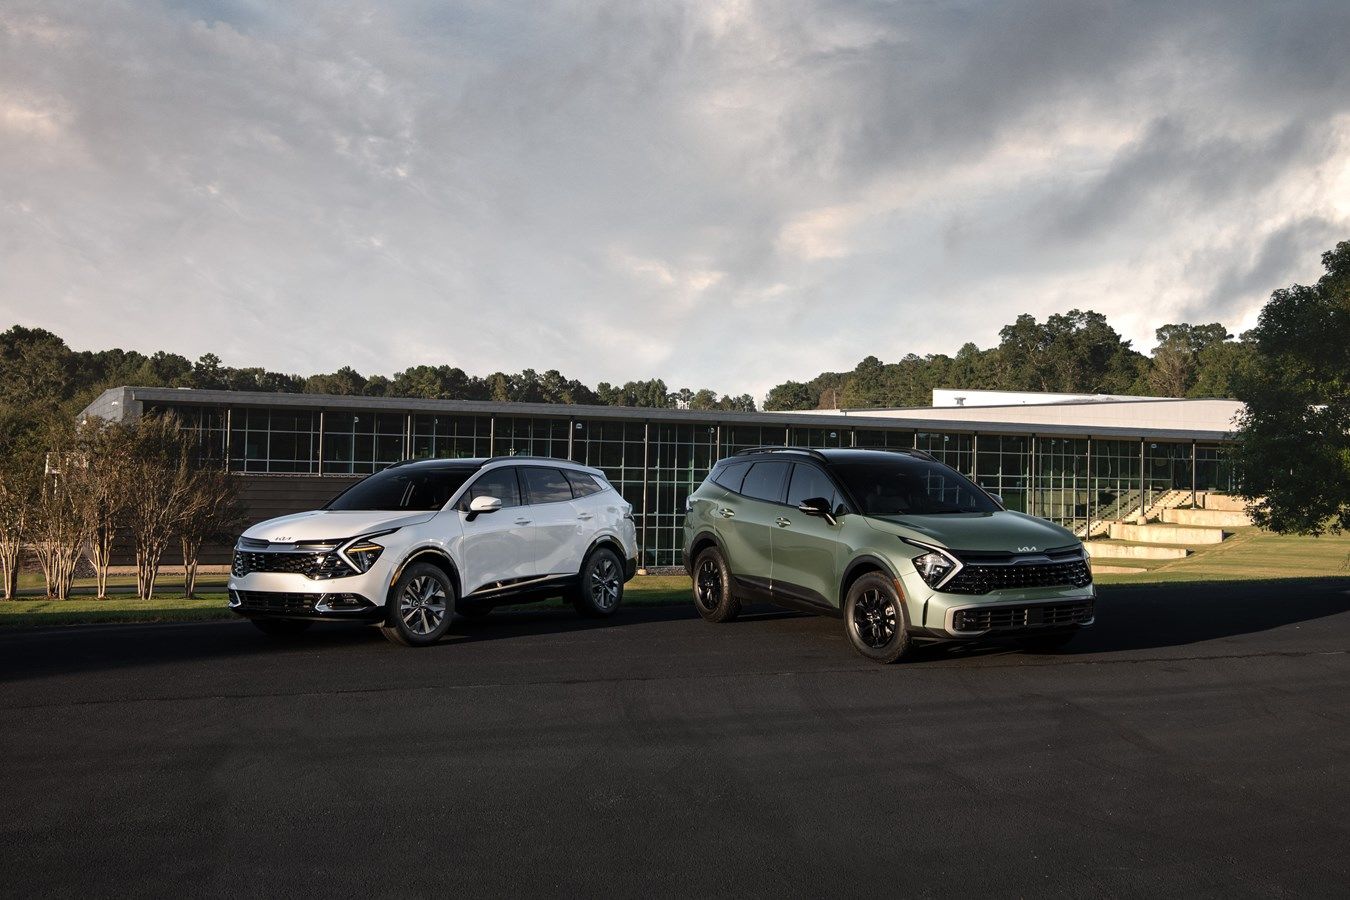 Forge A New Path In The 2023 Kia Sportage